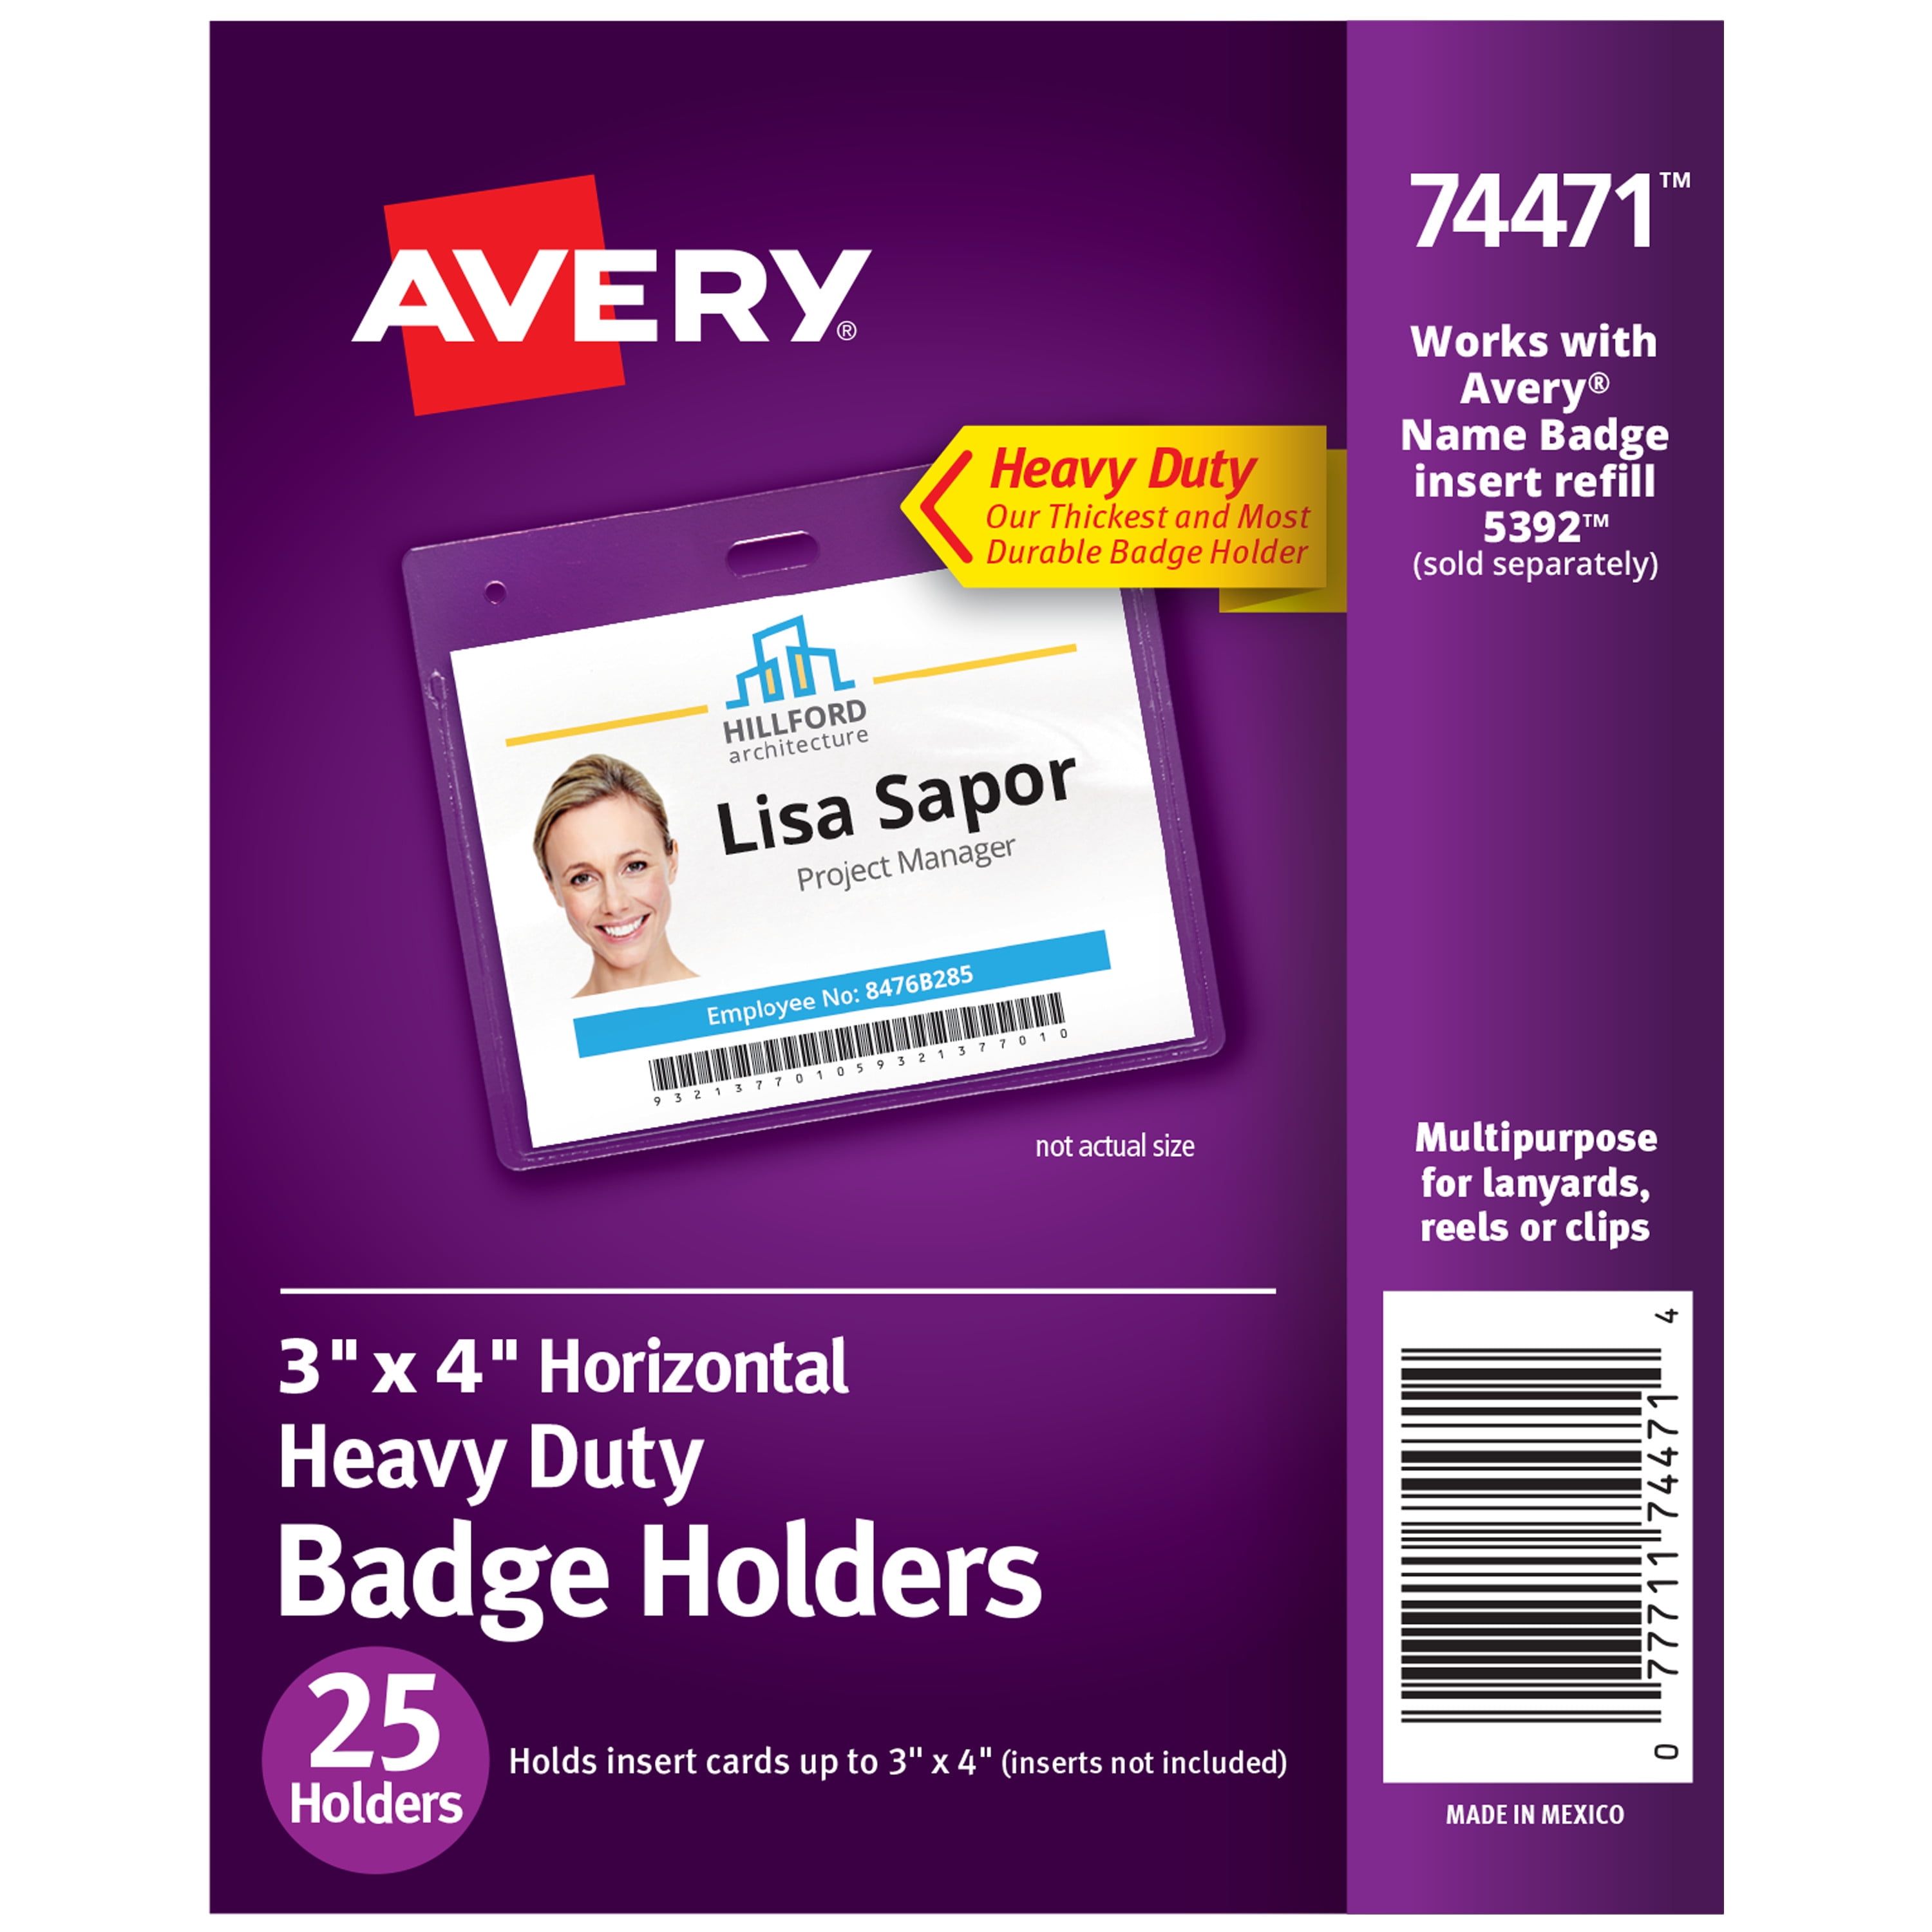 Avery 4834 A6 Name Badge Pockets with Lanyards and Inserts